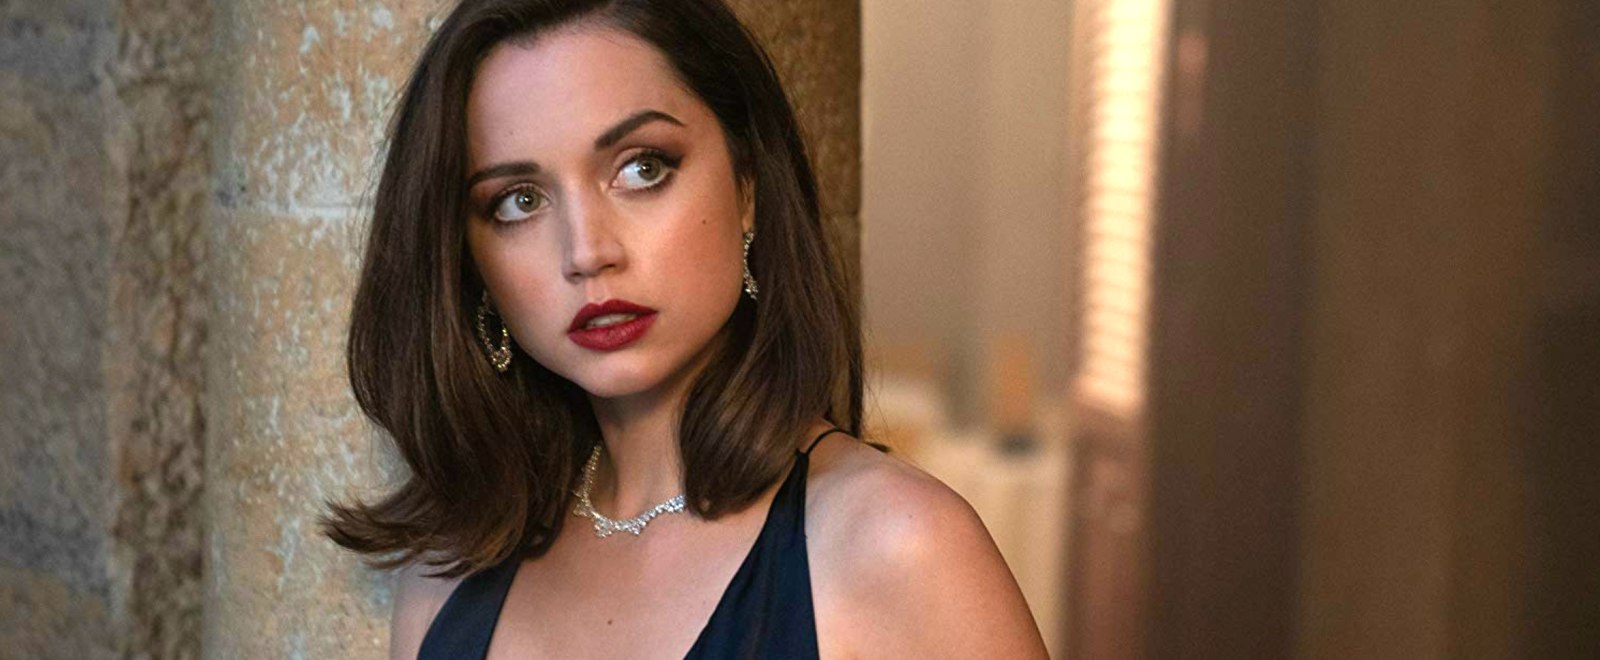 Ana de Armas Relates Most to 'Knives Out' Character Marta; Says 'I